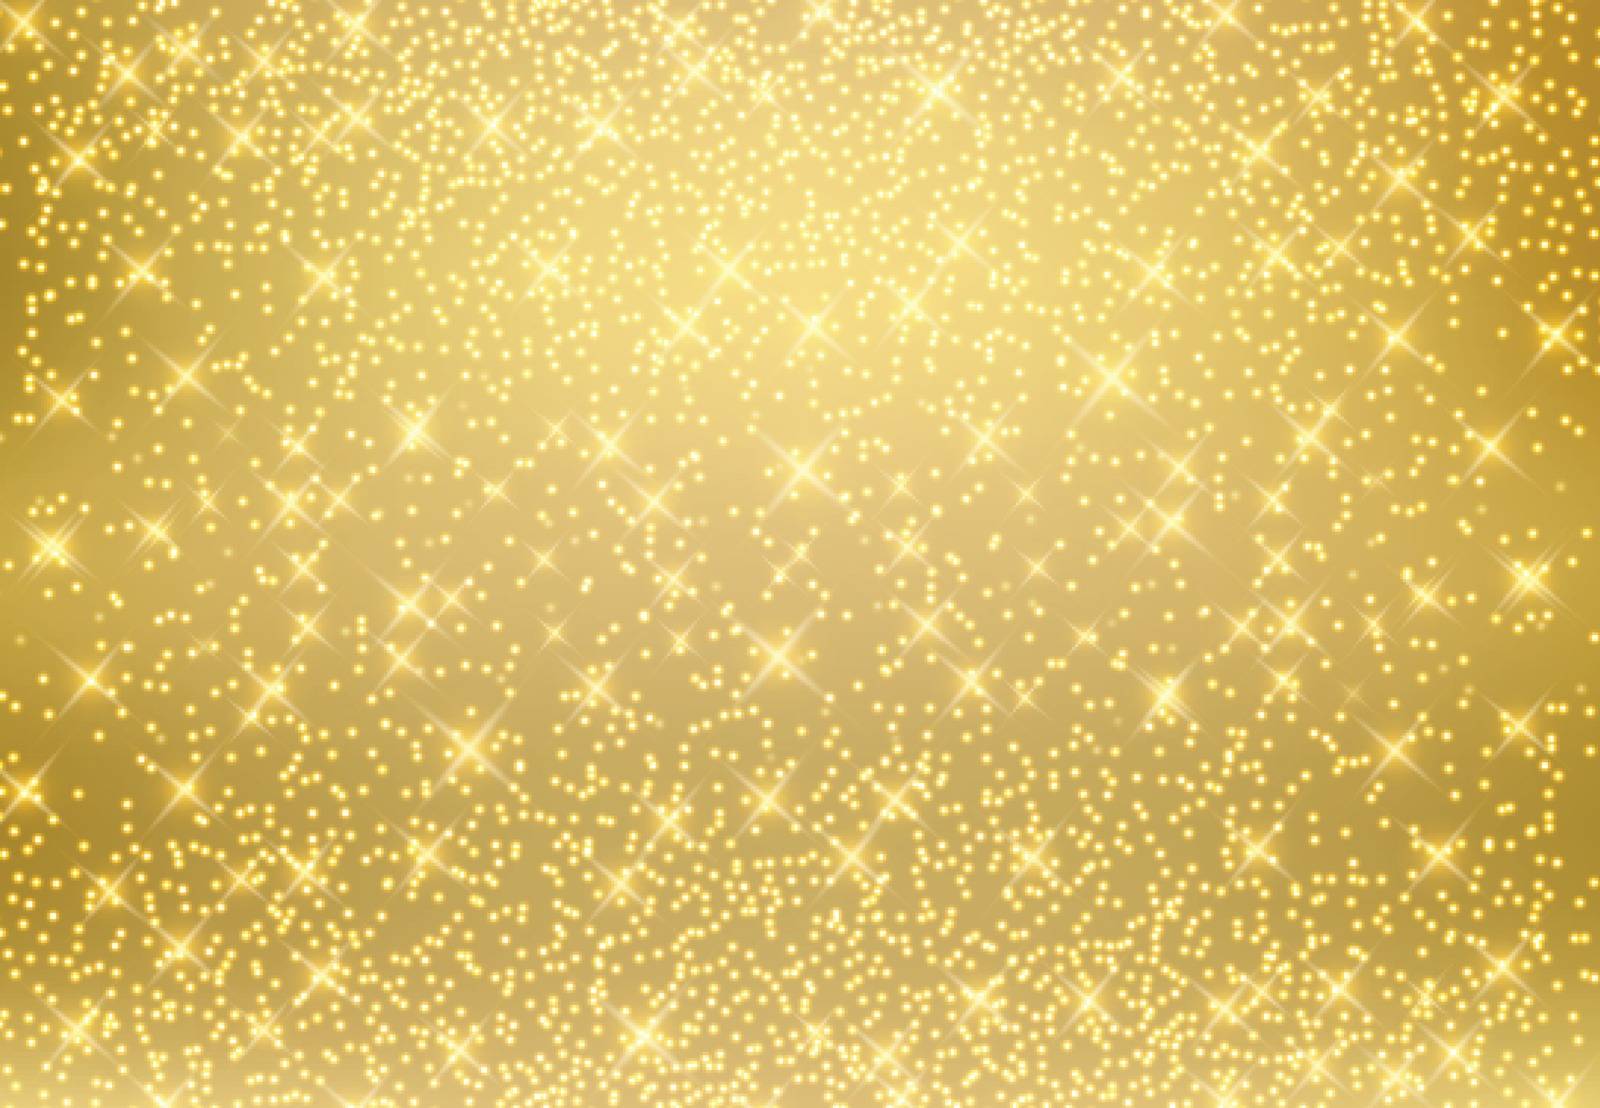 glide indhente Mechanics Gold glitter dust texture shining on golden background. Gold par Stock  Image | VectorGrove - Royalty Free Vector Images with commercial license